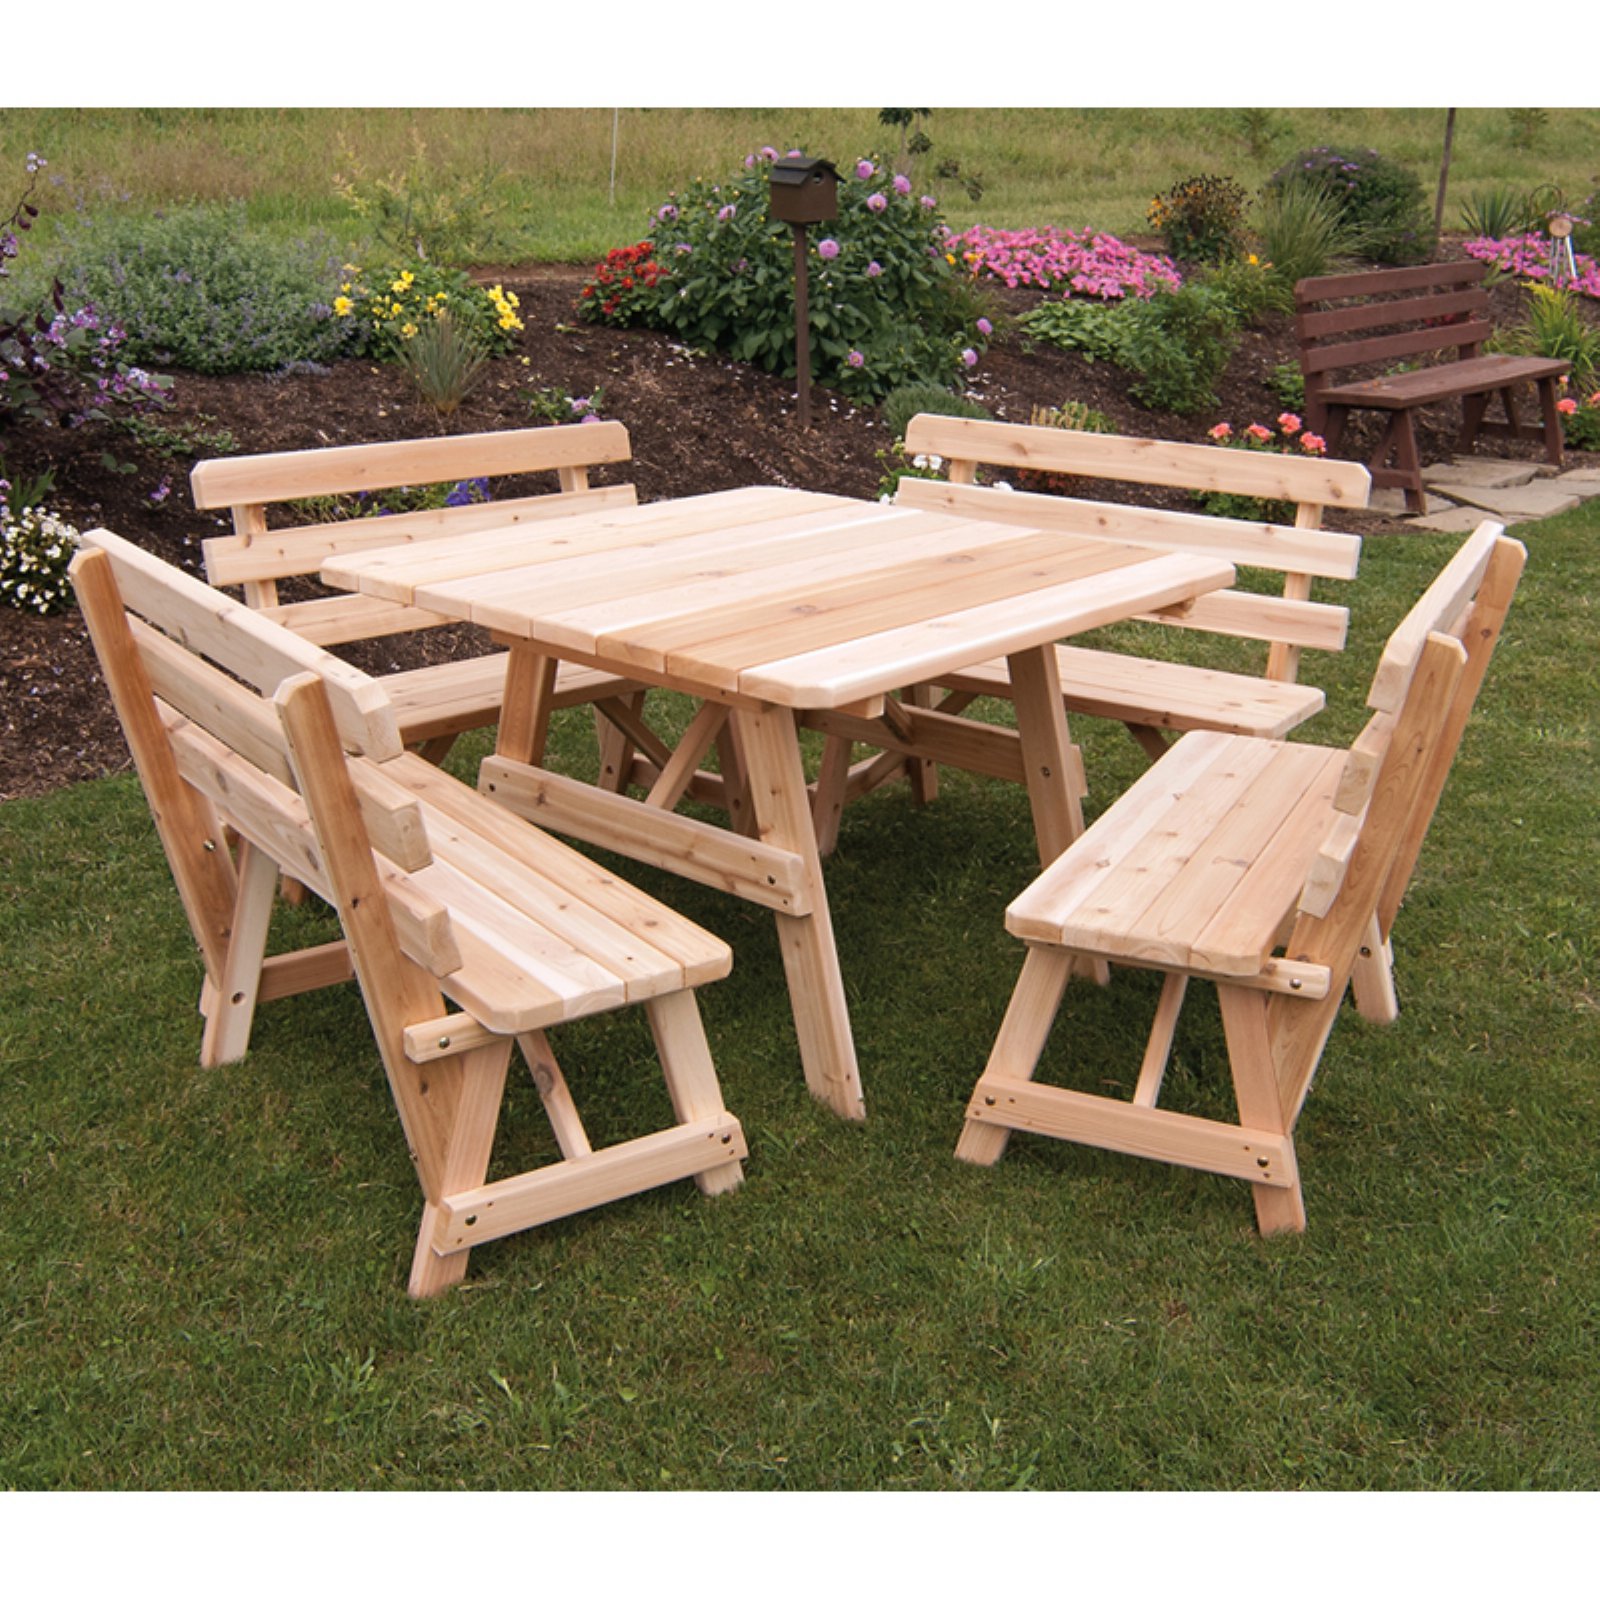 A &amp; L Furniture Western Red Cedar 5 pc. 43 in. Square Table Set with 4 Backed Benches and Optional Umbrella Hole - image 2 of 2